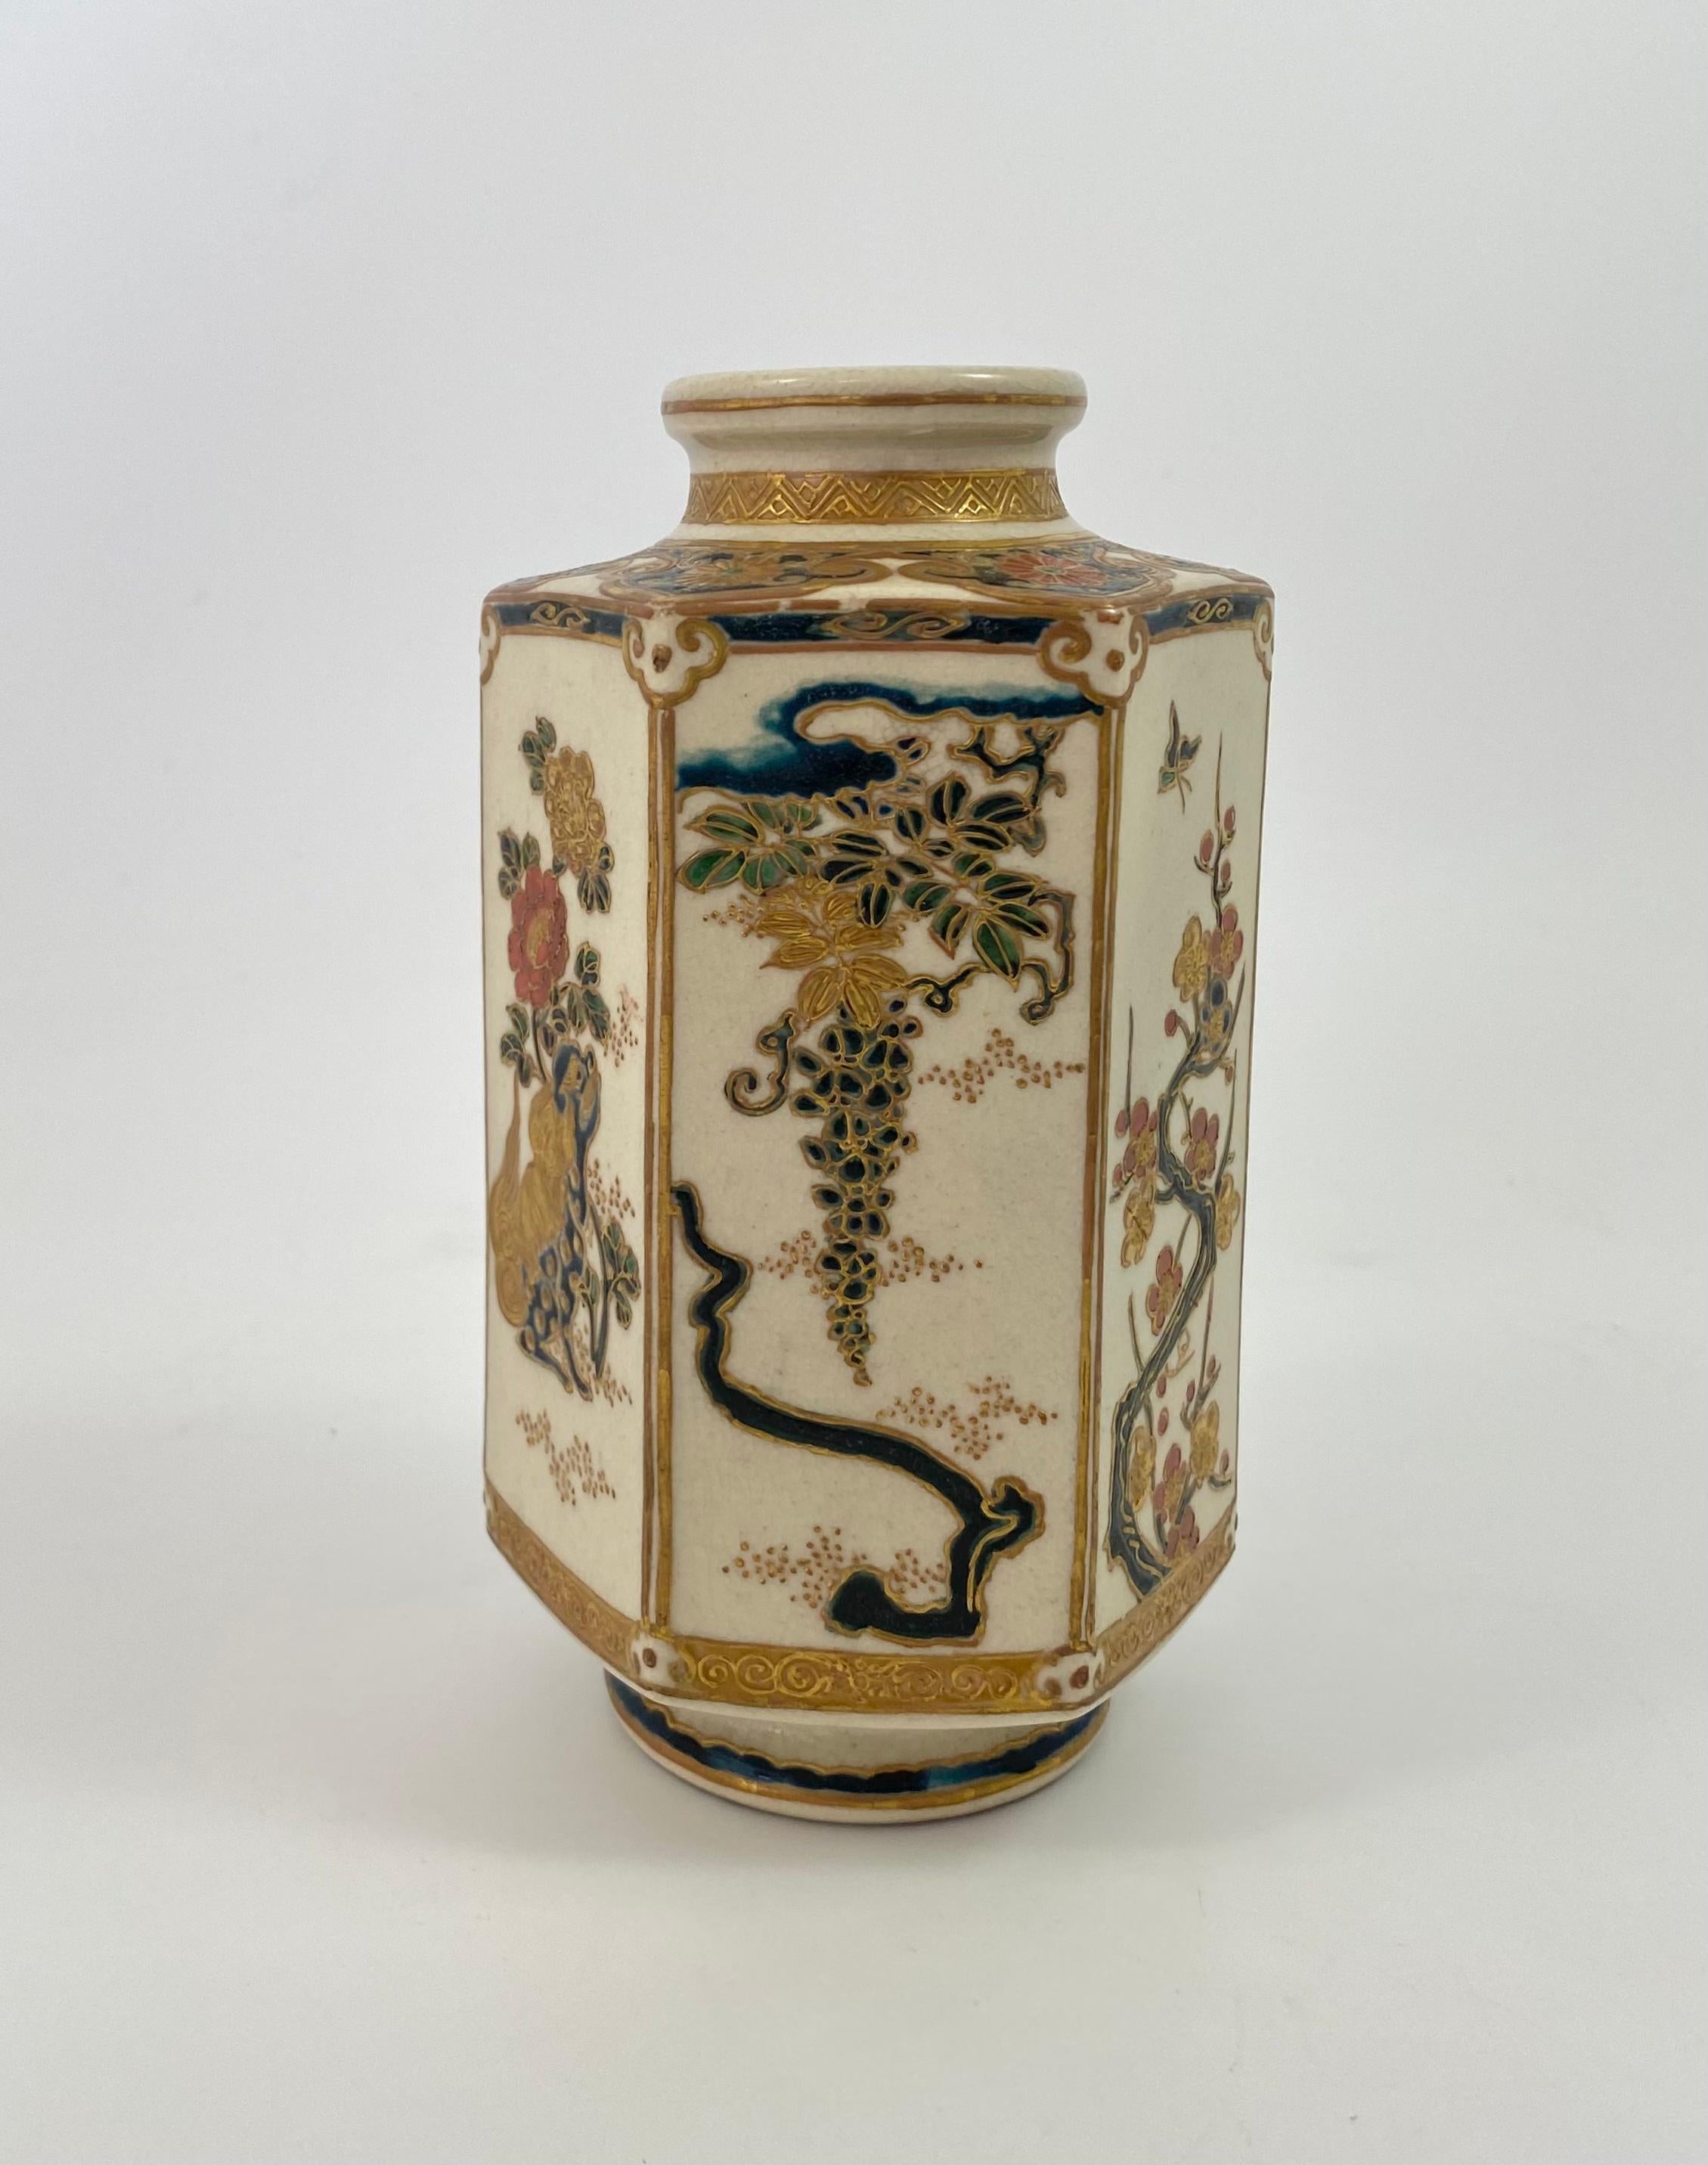 Imperial Satsuma vase, signed Gyokusen, Japan, Meiji Period. The hexagonal shaped vase painted with a panel of a seated Shi Shi dog, beneath a flowering plant, the reverse with Ho Ho bird perched upon a branch. The other panels with flowering